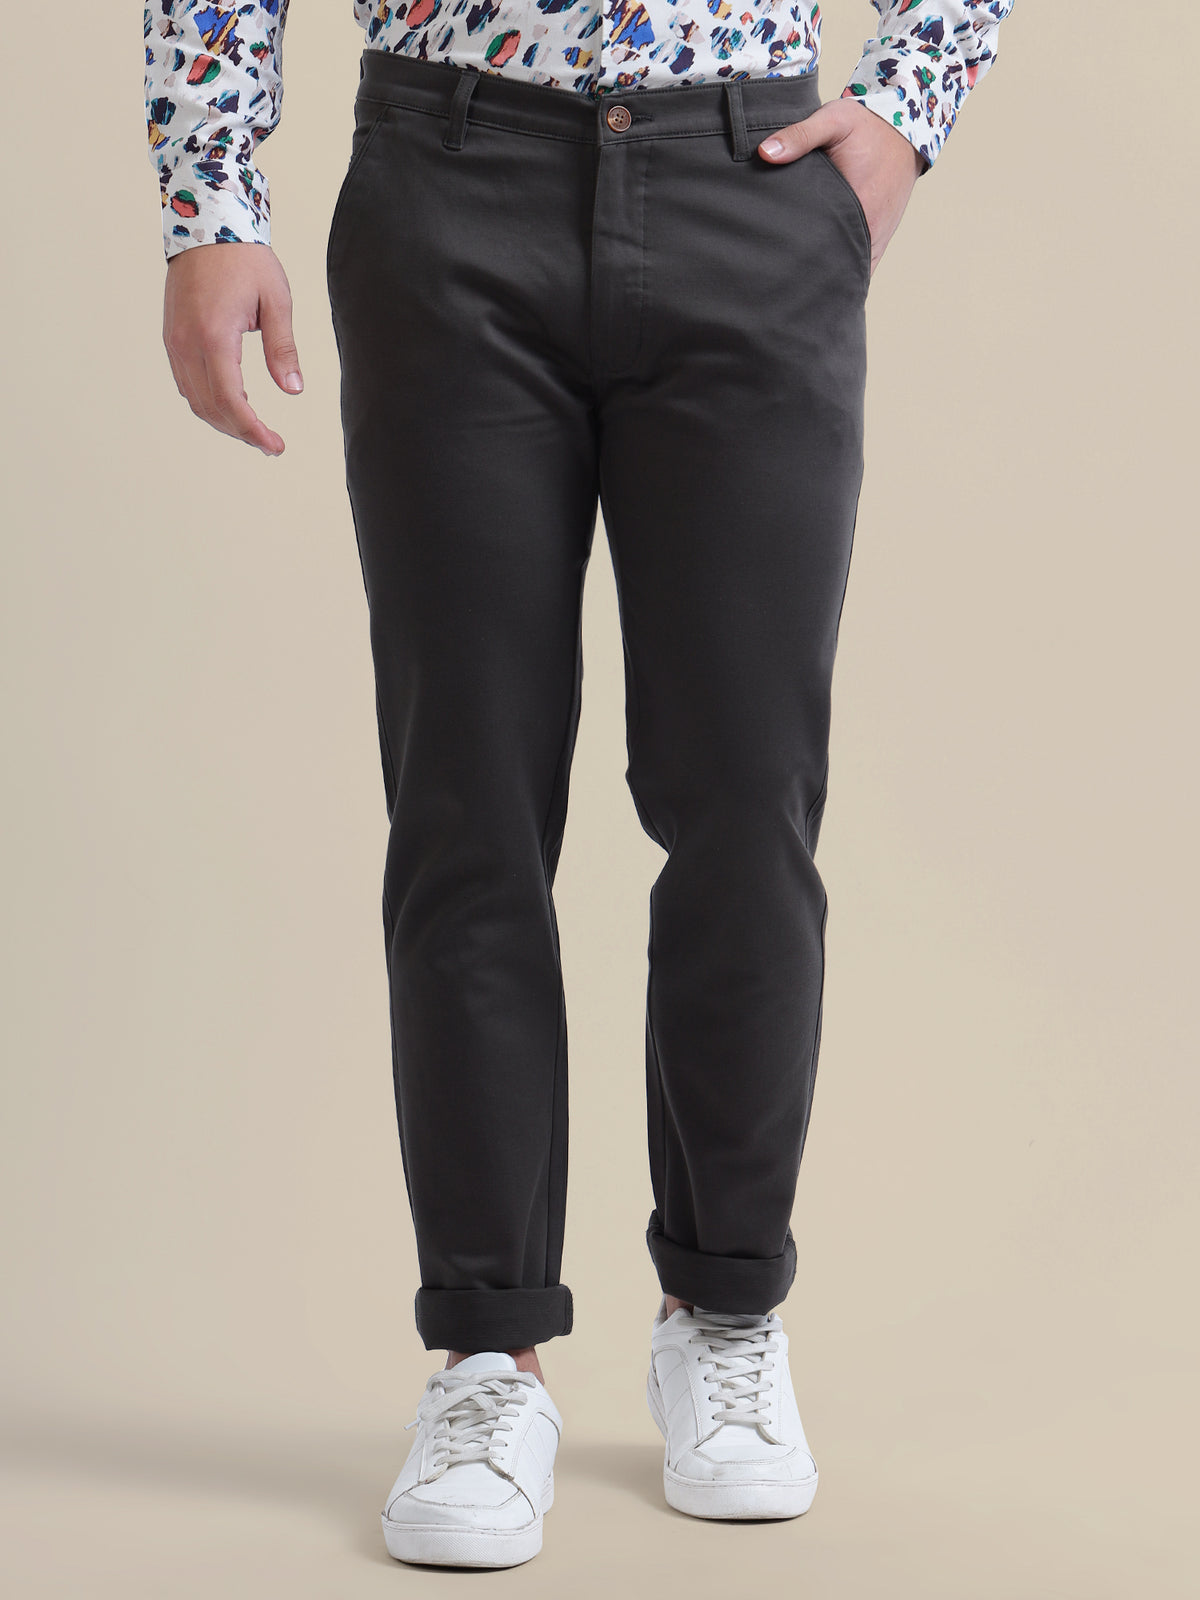 Black Casual Trousers Solid Cotton Lycra Smart Fit